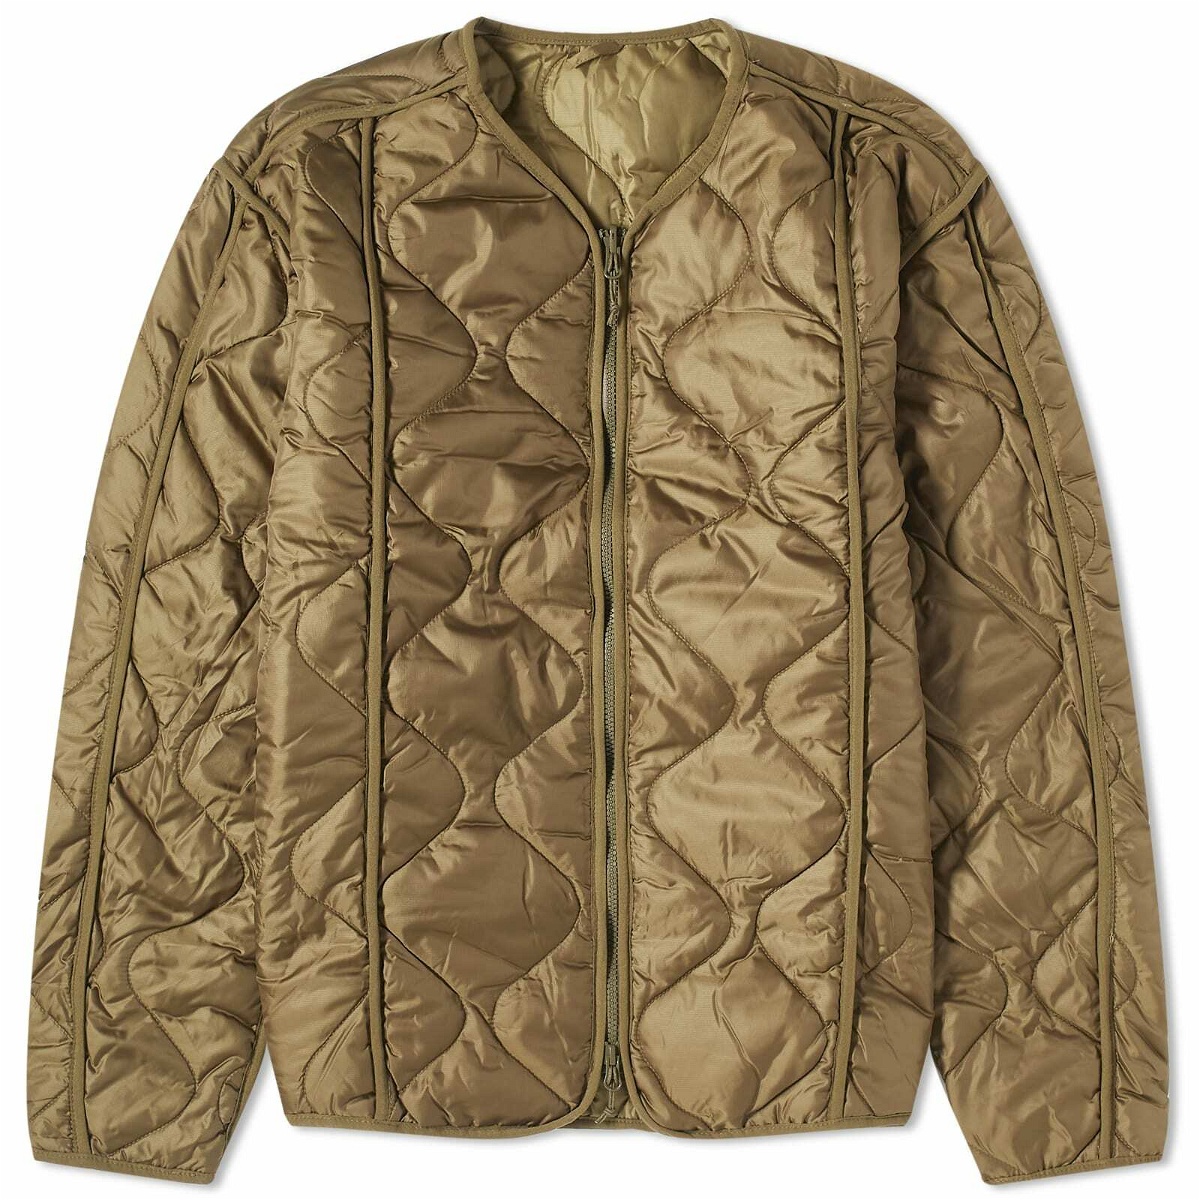 Foret Men's Humid Reversible Liner Jacket in Army/Olive Foret